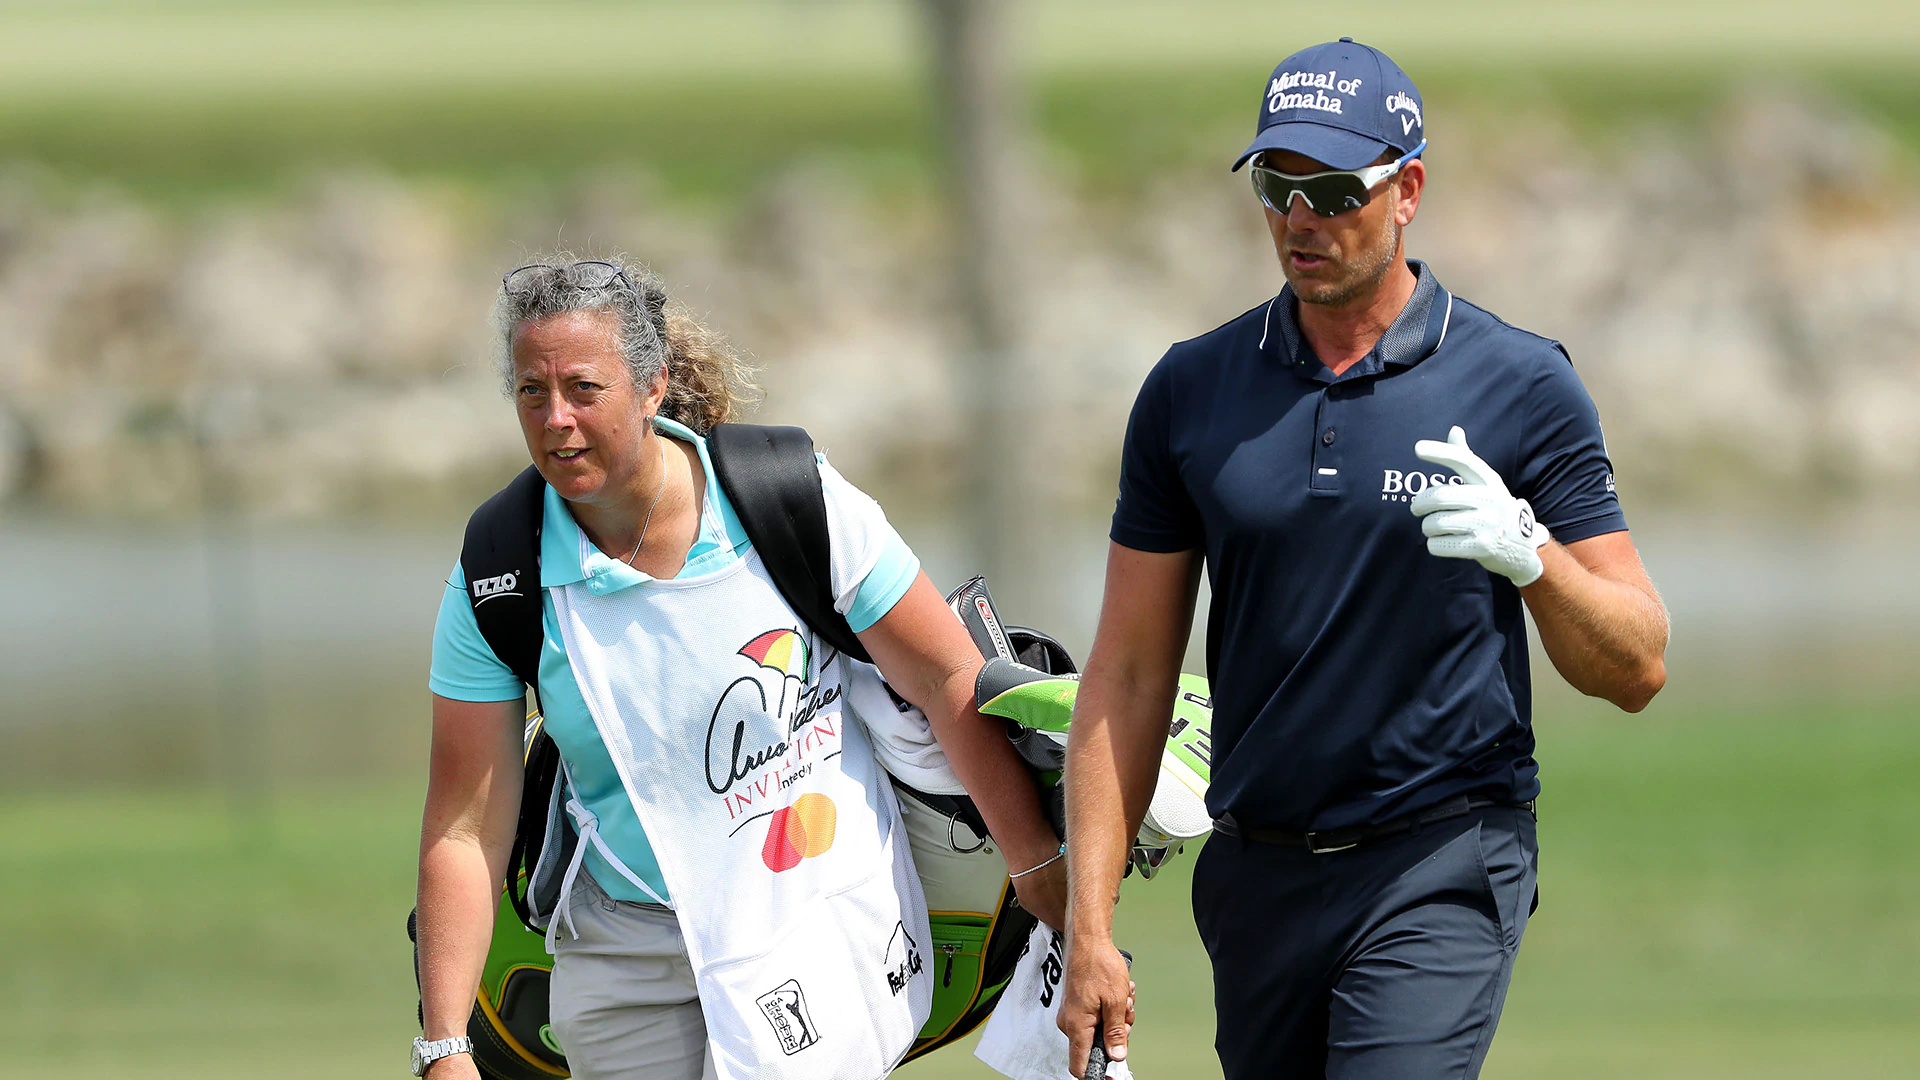 Stenson (69) reunited with Sunesson: 'She did OK'